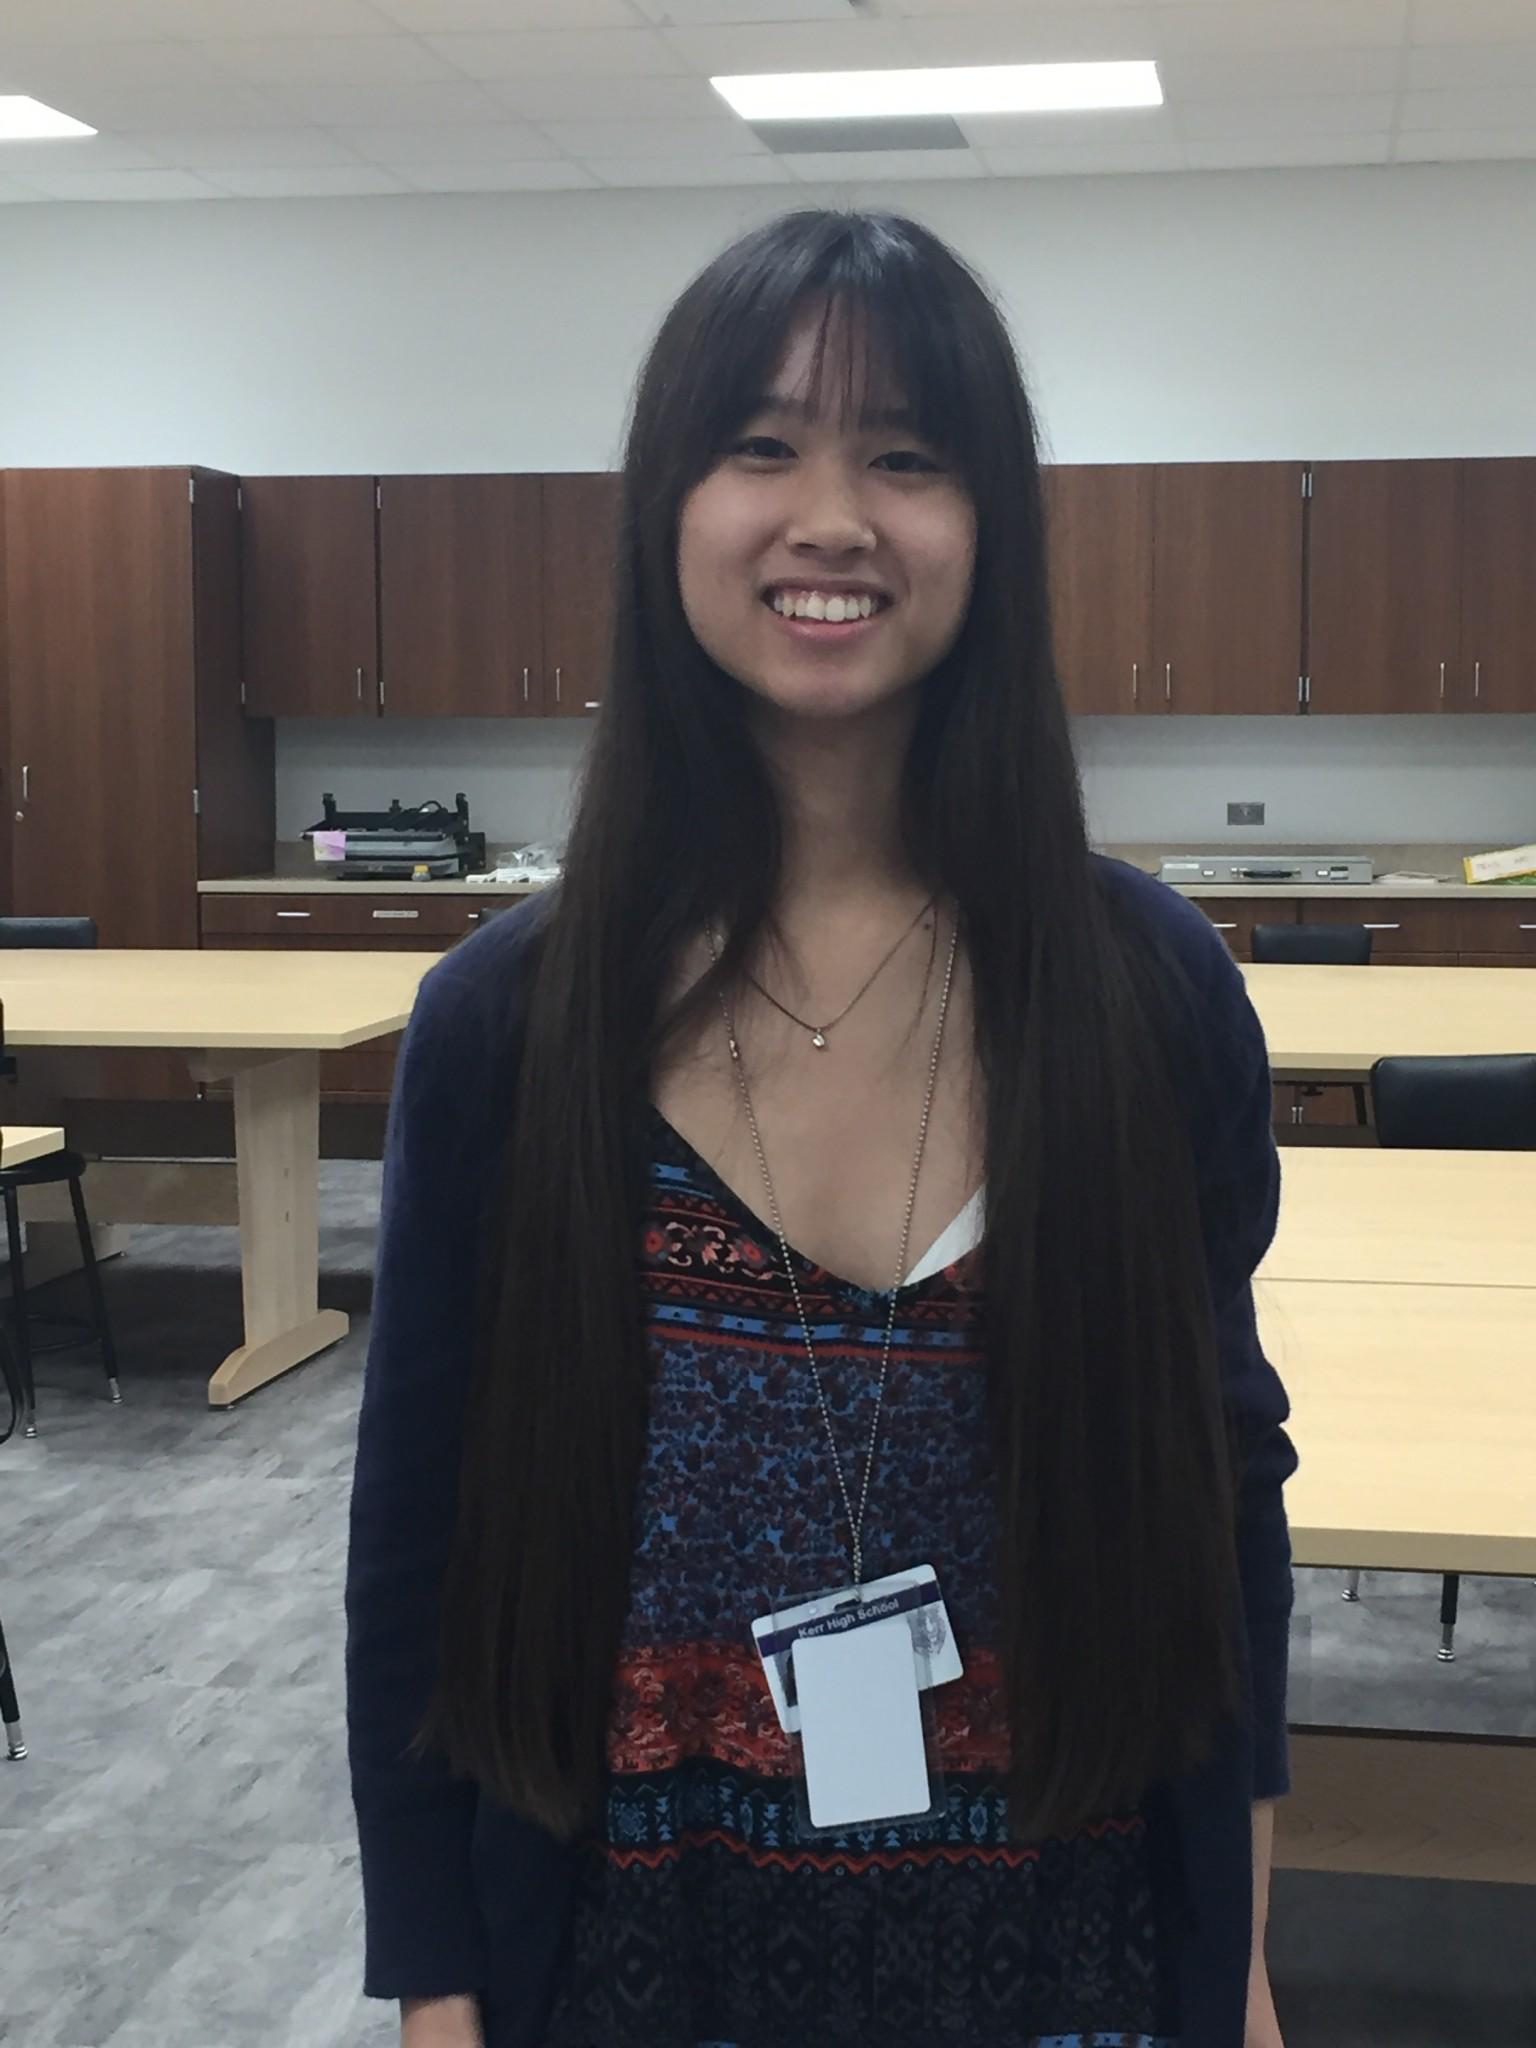 Junior Nhi Mong Chung poses for a feature photo in one of the art rooms in the new building.